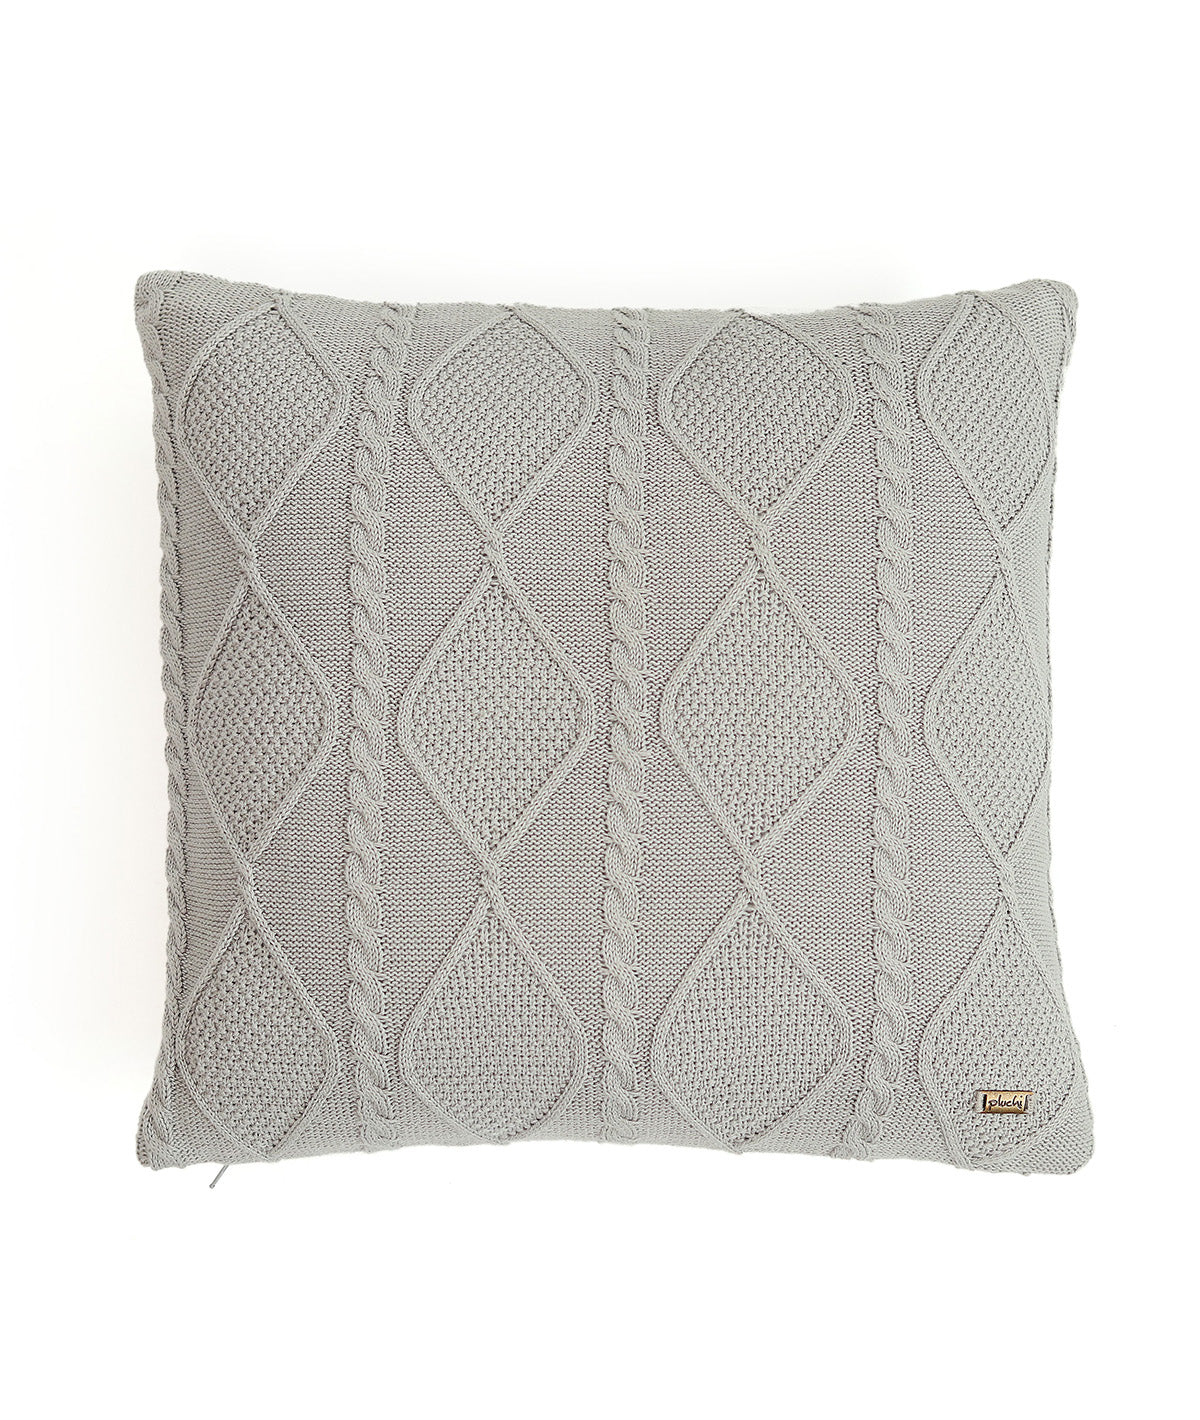 Cable Moss Cool Grey Cotton Knitted Decorative 16 X 16 Inches Cushion cover